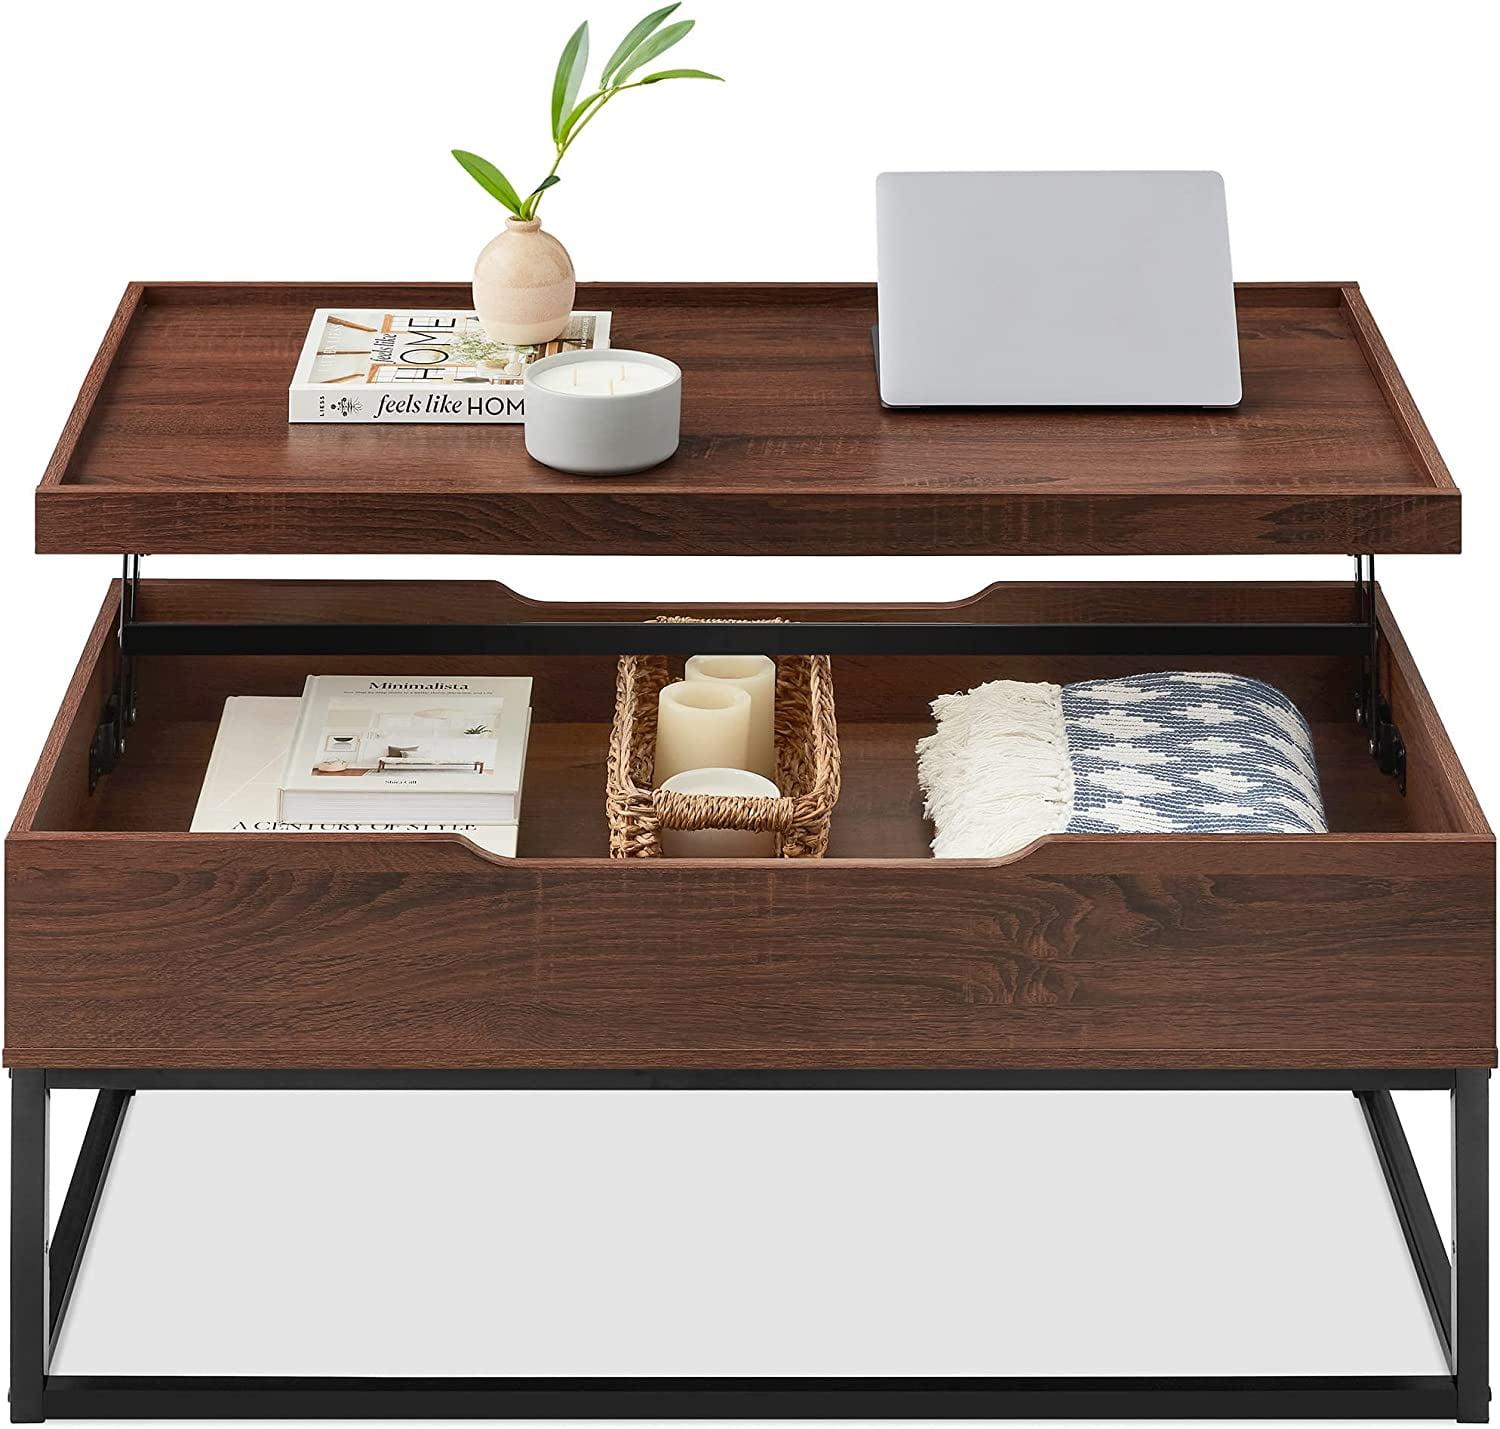 Modern Brown Lift-Top Coffee Table with Hidden Storage and Wood-Grain Finish